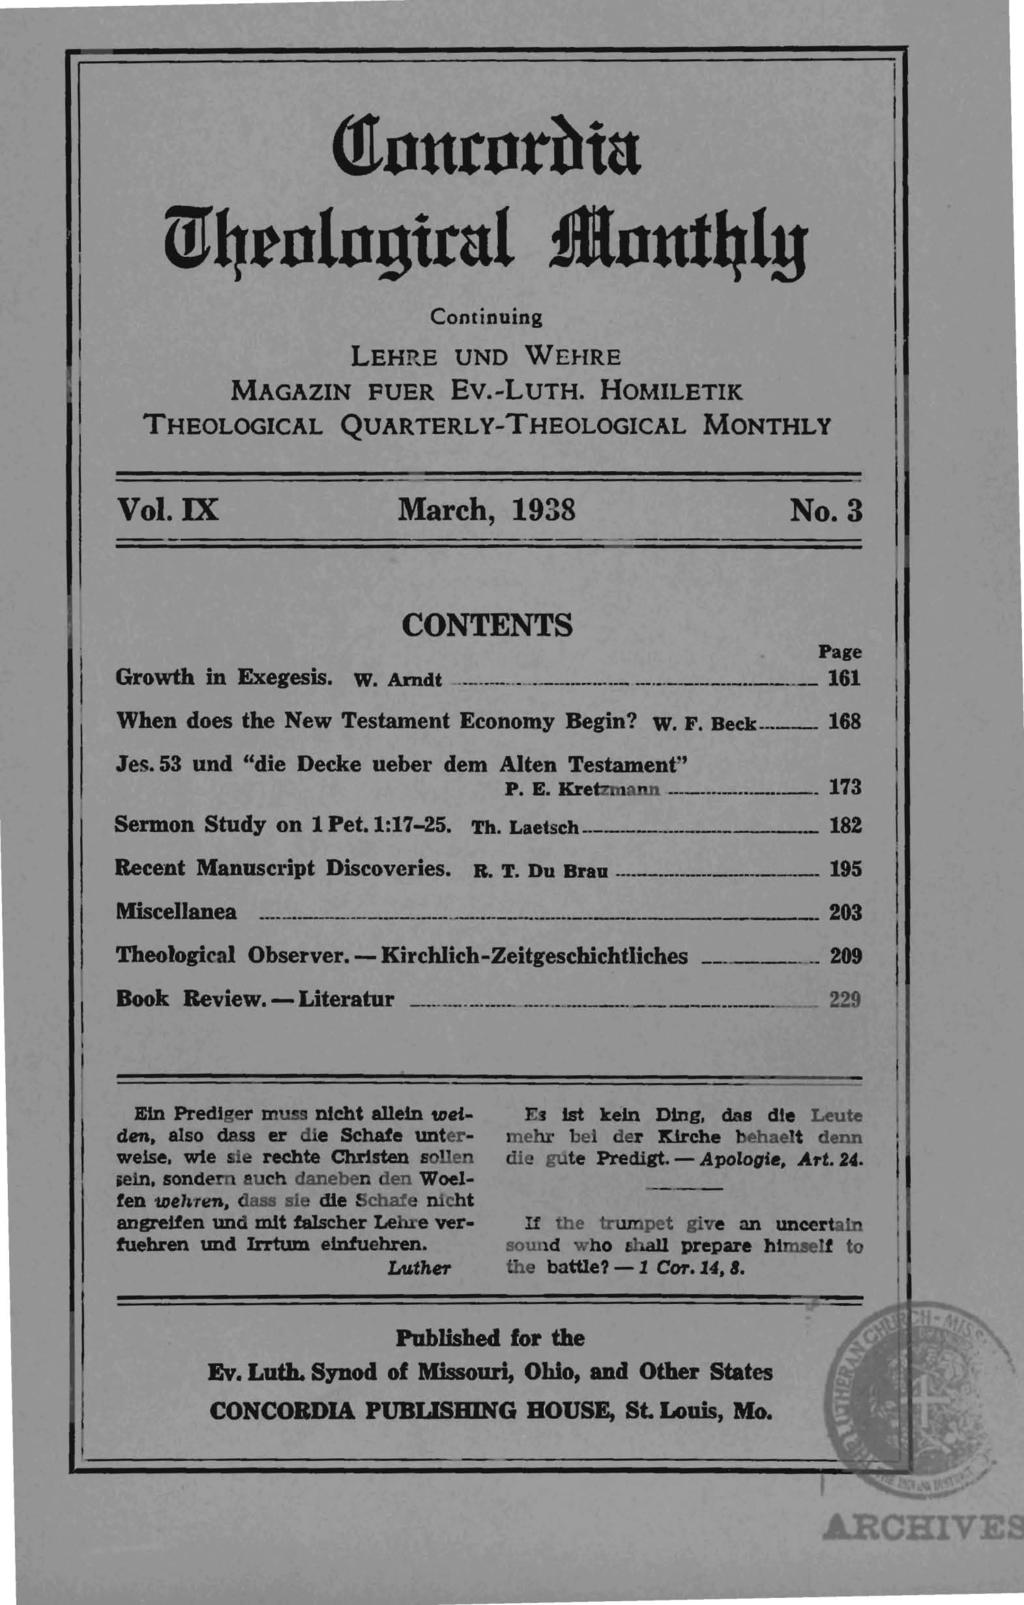 <1tnurnrbtu m~rnlngirul linut41y Continuing LEHRE UND WEHRE MAGAZIN FUER Ev.-LuTH. HOMILETIK THEOLOGICAL QUARTERLY-THEOLOGICAL MONTHLY Vol. IX March, 1938 No.3 CONTENTS Page Growth in Exegesis. w.